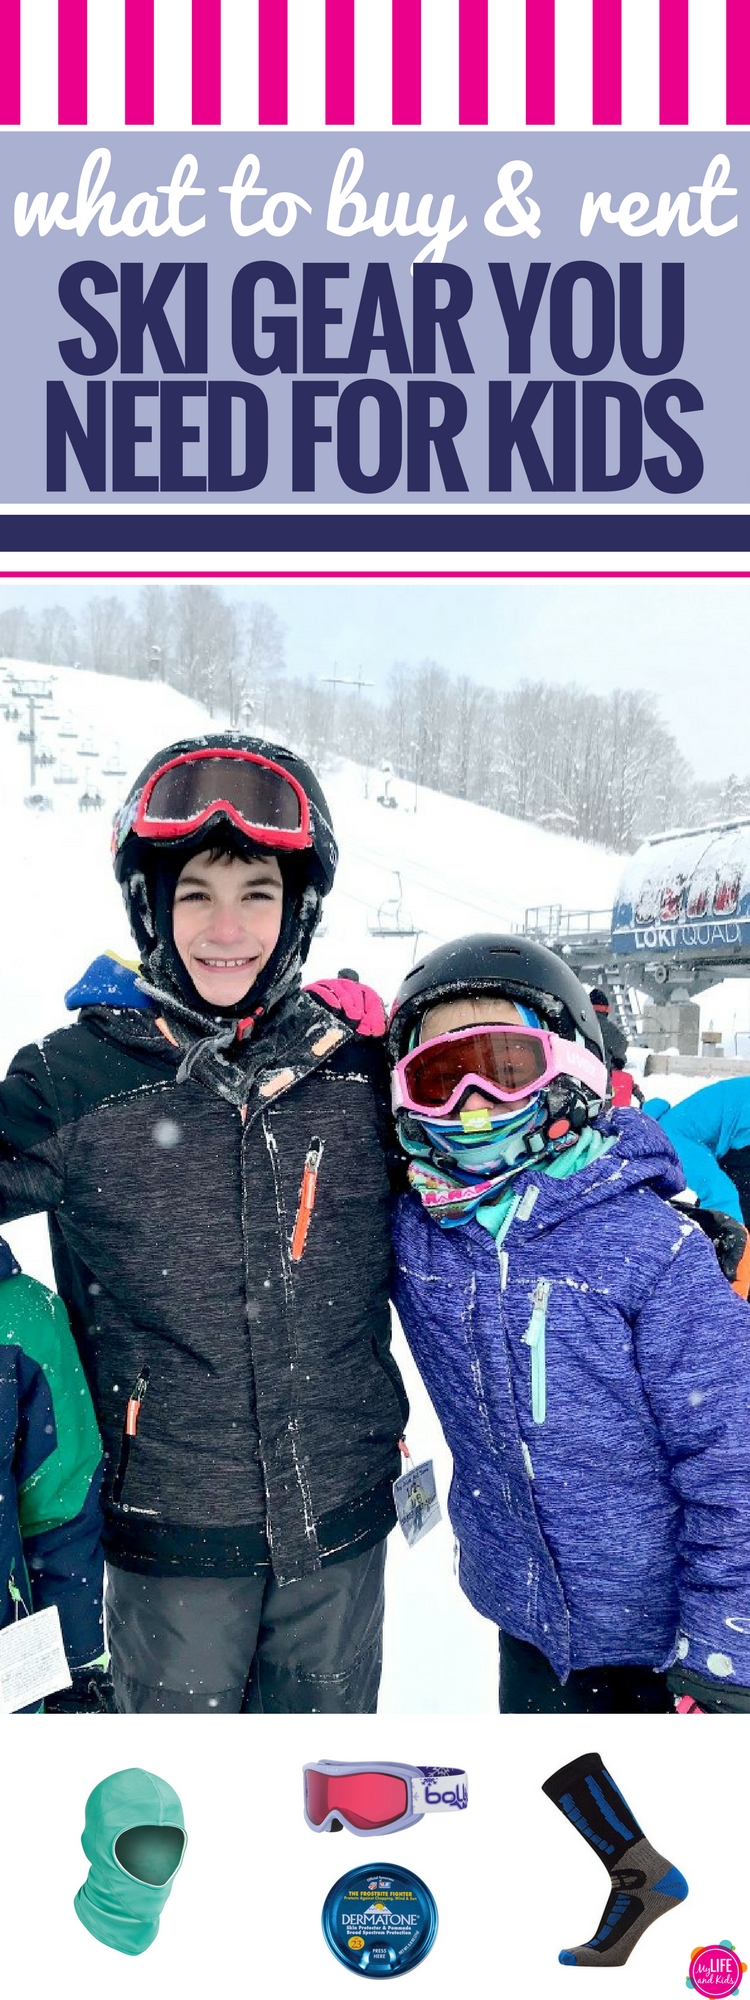 Whether you're taking the kids to downhill ski at resorts or staying close to home, these tips for ski gear for children will guide you through what products and gear you should buy in advance and what you should plan to rent this winter. Great for toddlers too. #skigear #skitrip #skiingwithkids #winter #snow #downhillski